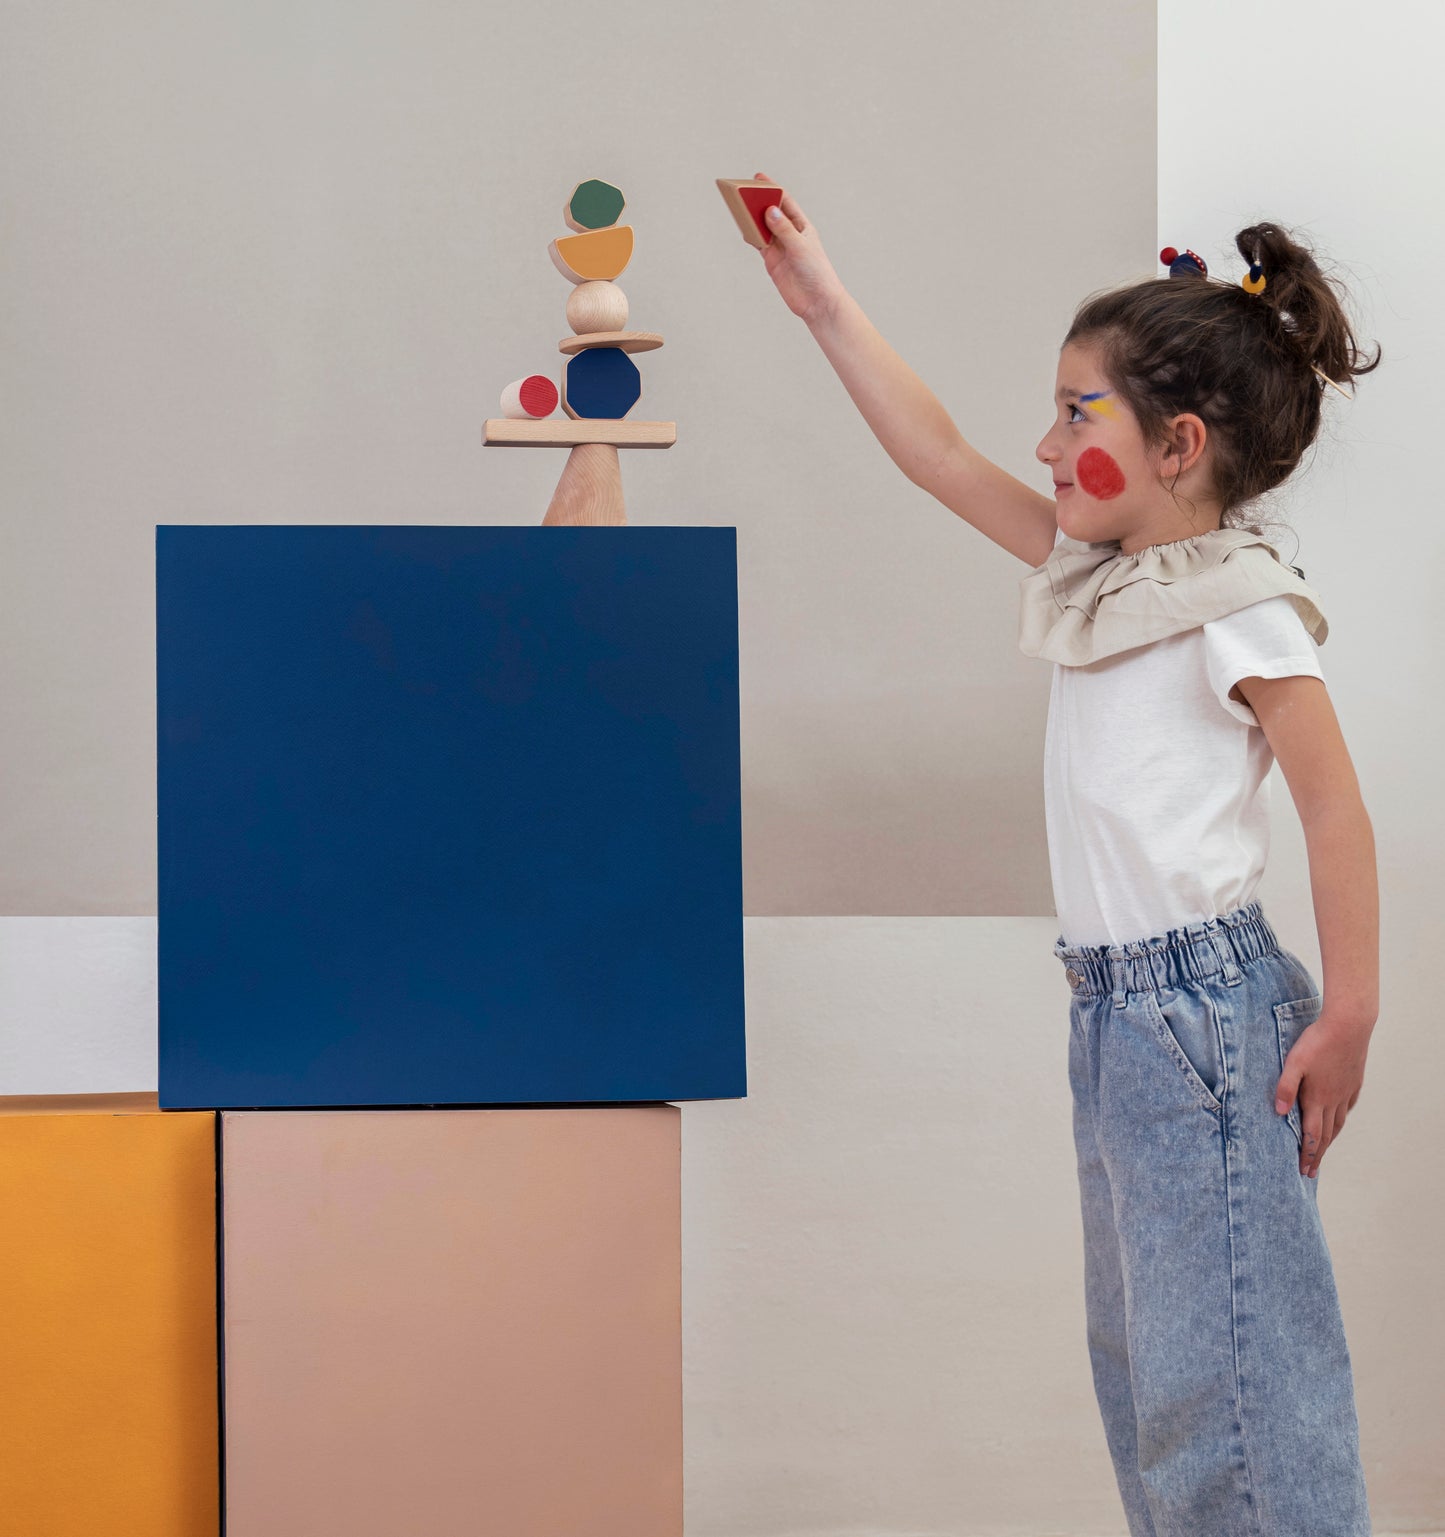 Abstract shapes stacking toy - two